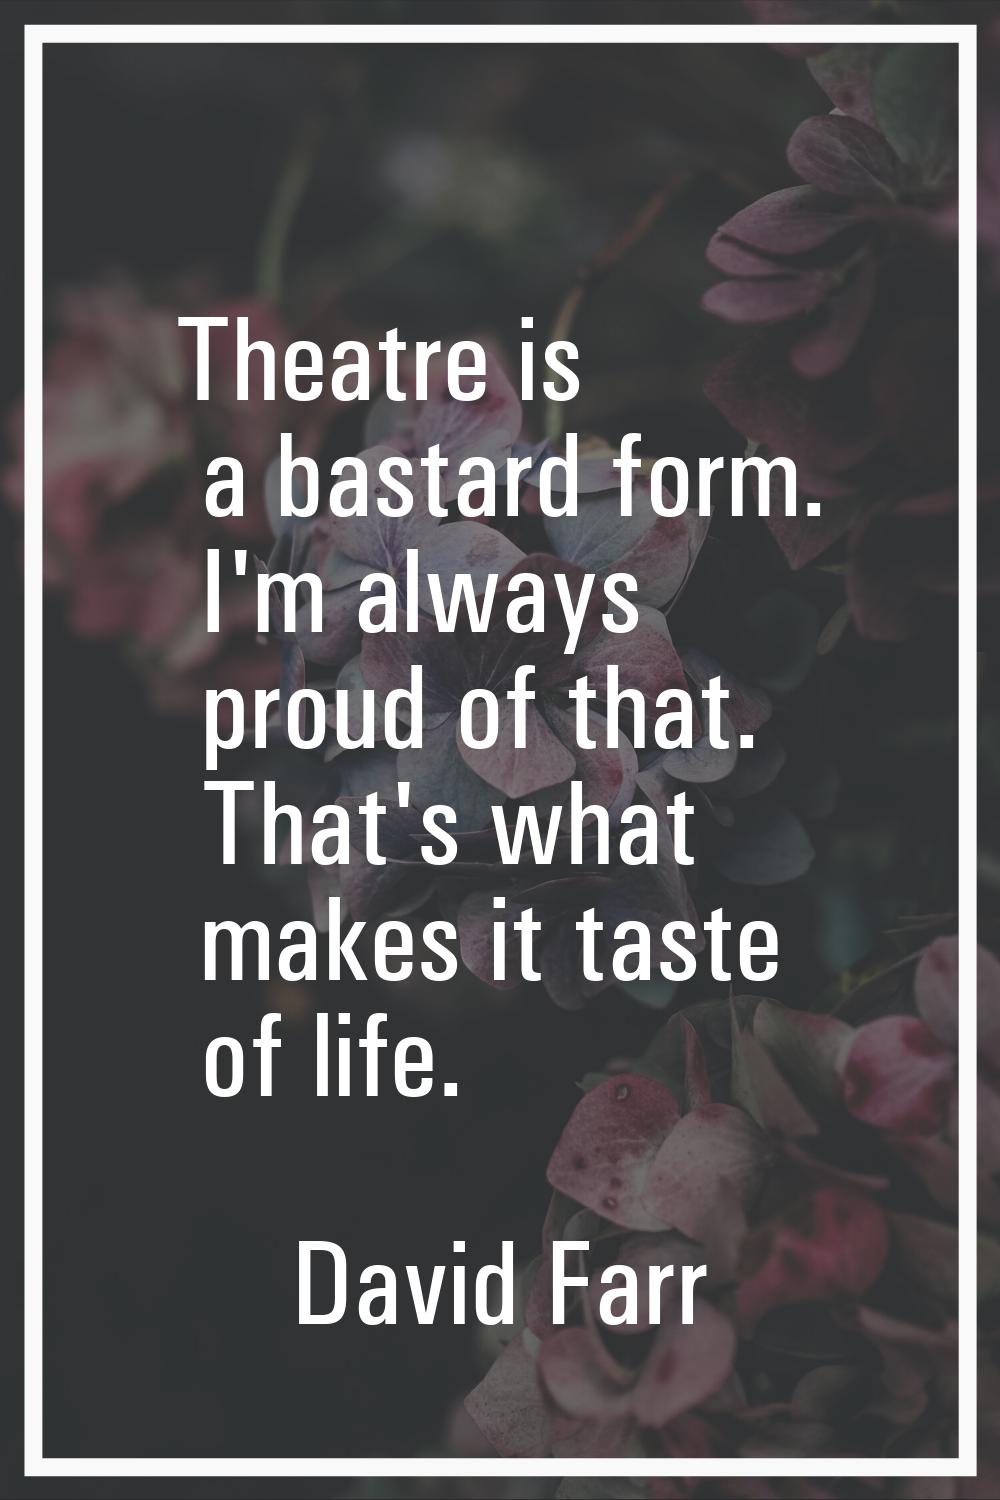 Theatre is a bastard form. I'm always proud of that. That's what makes it taste of life.